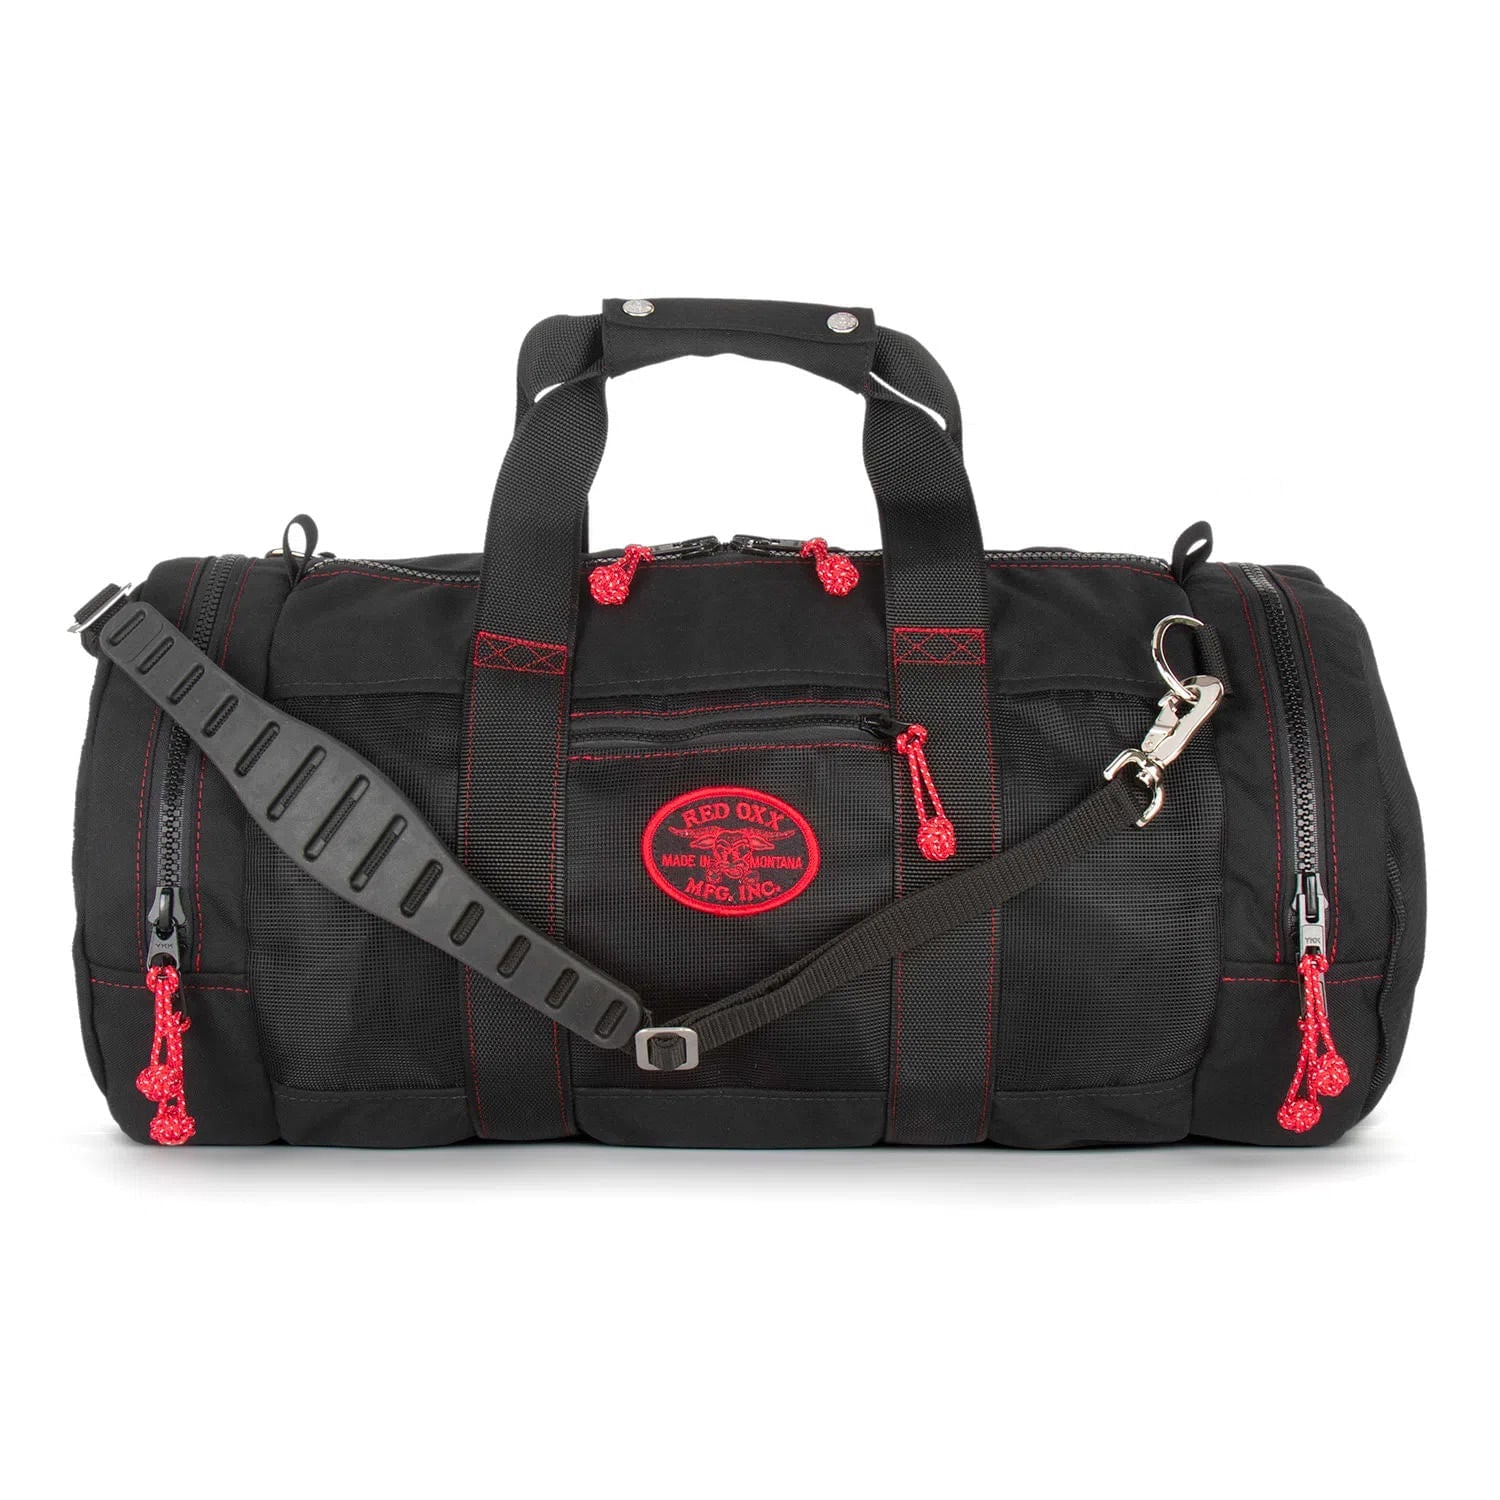 Front view of bag with Red Oxx logo and Red Double Box X stitching details.